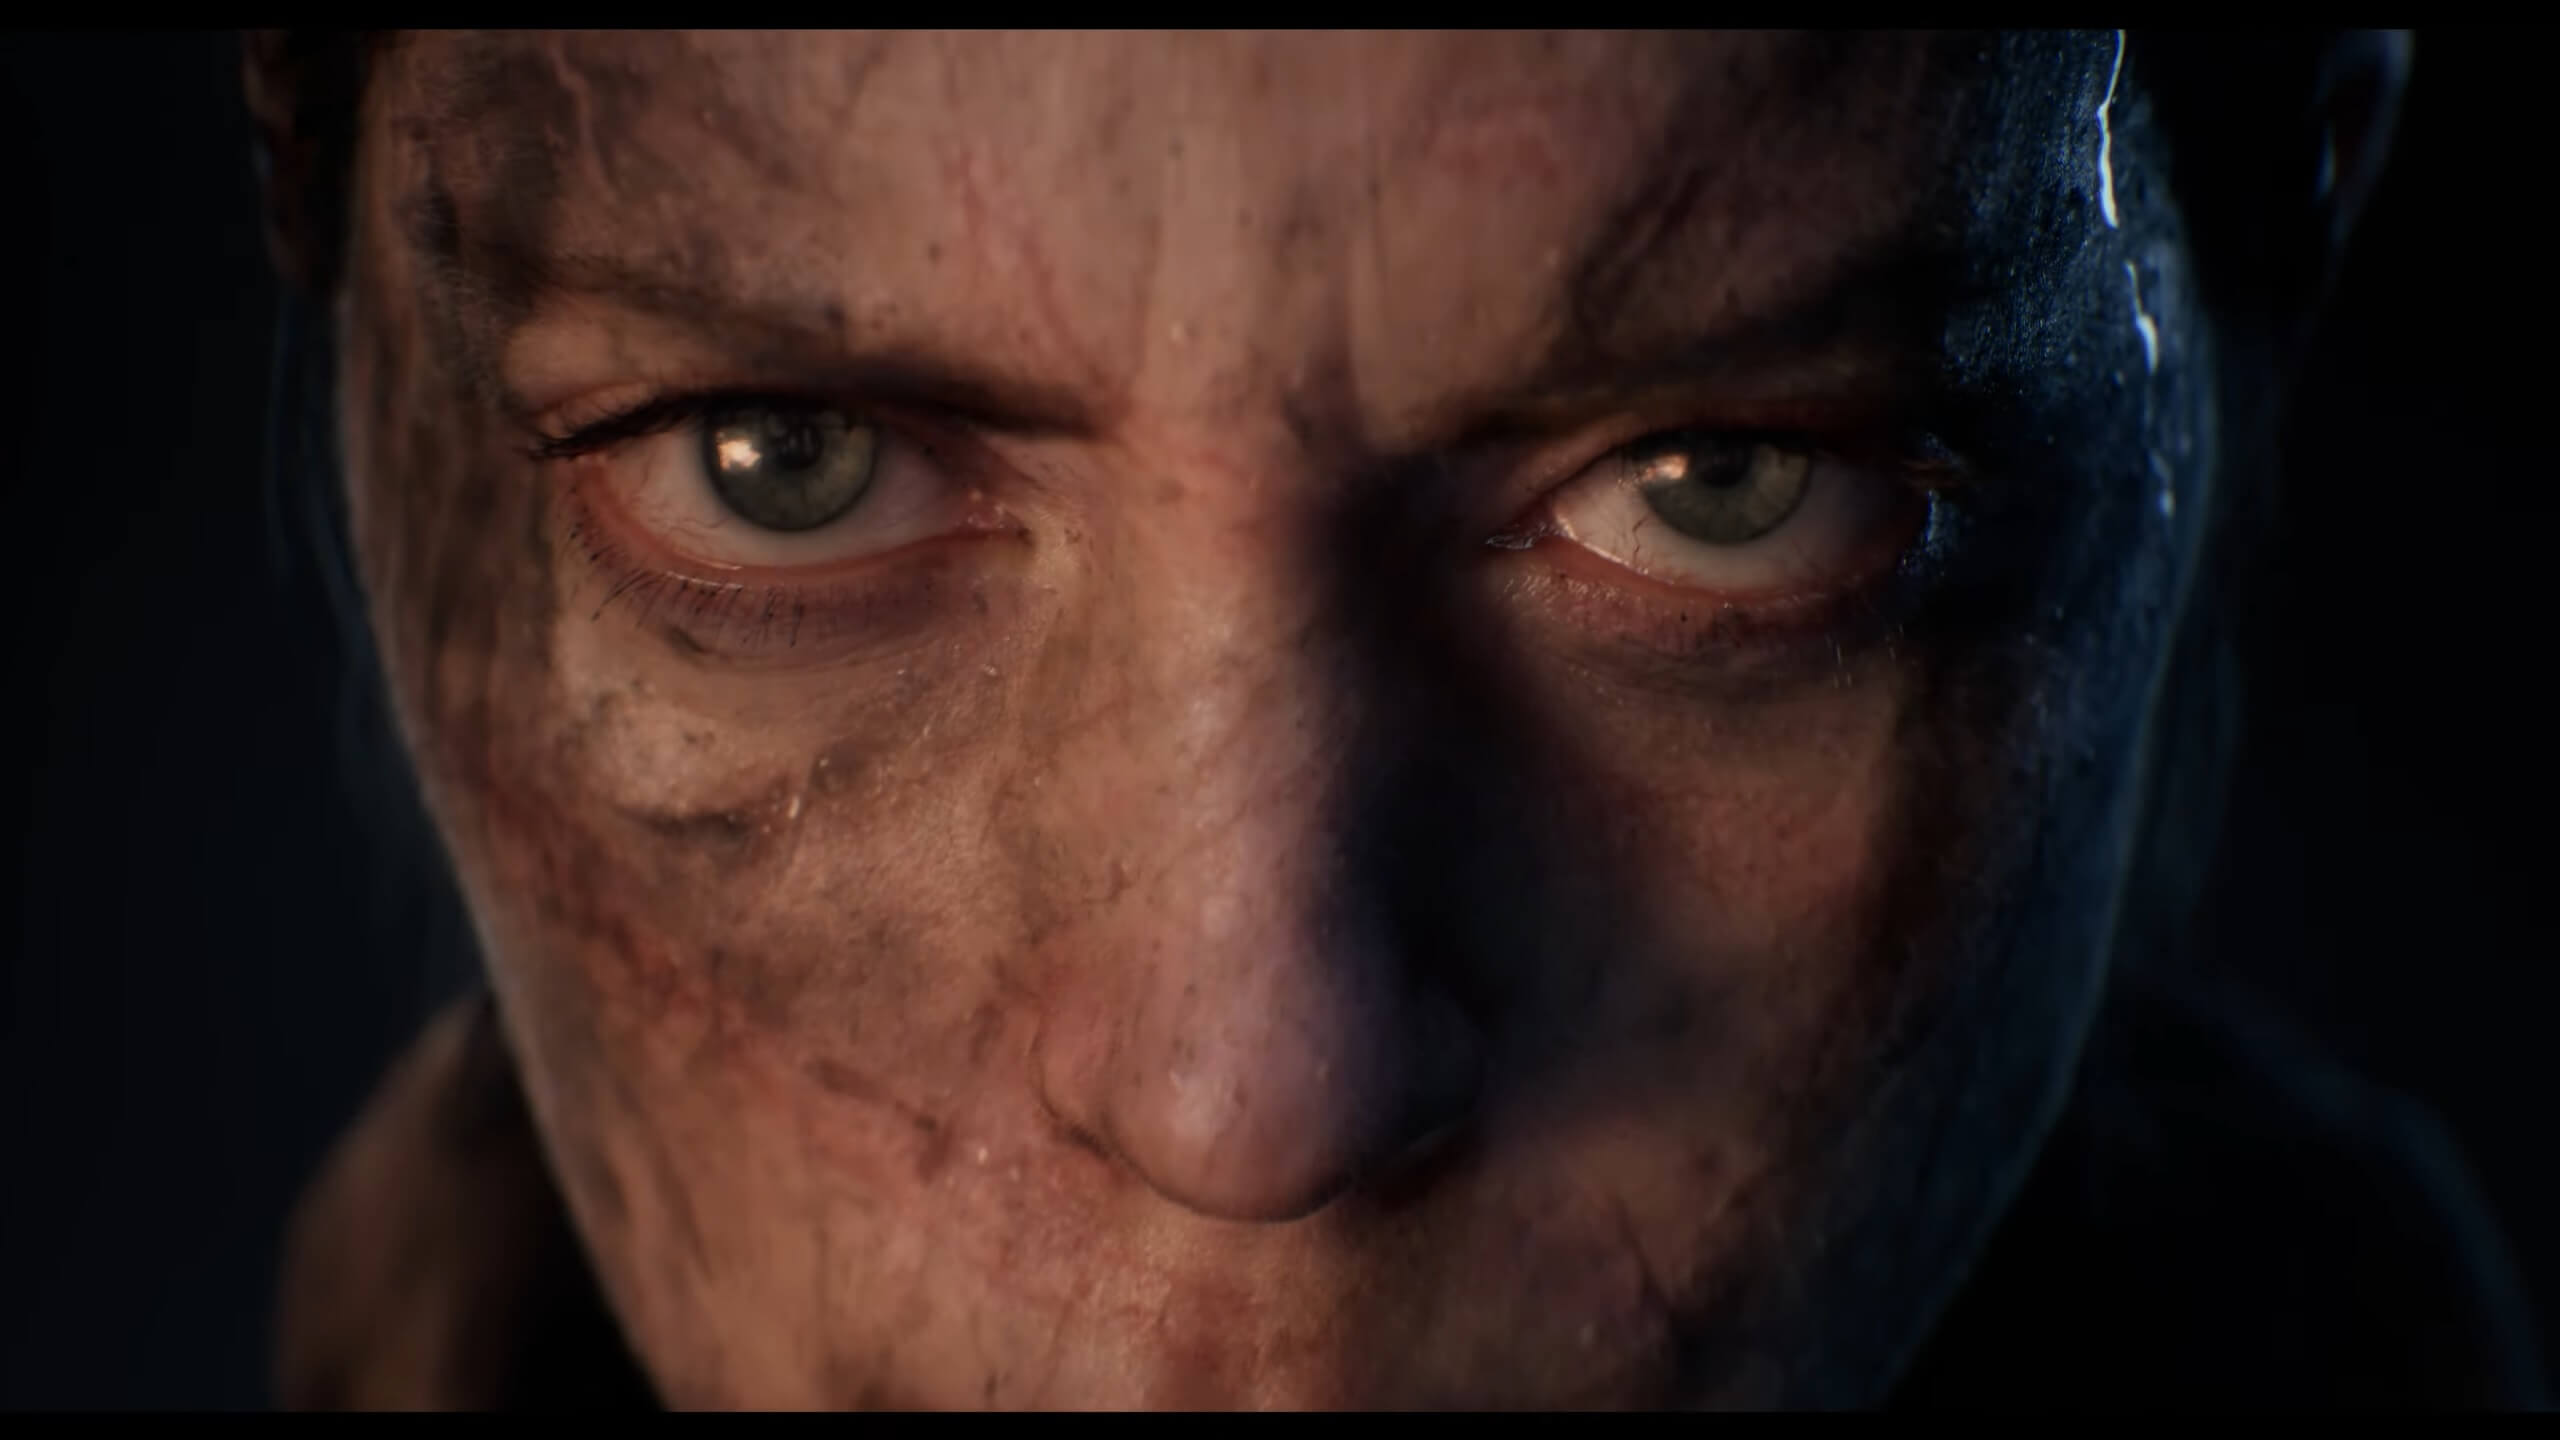 Hellblade 2 announced for Xbox Series X with 'in-engine' trailer